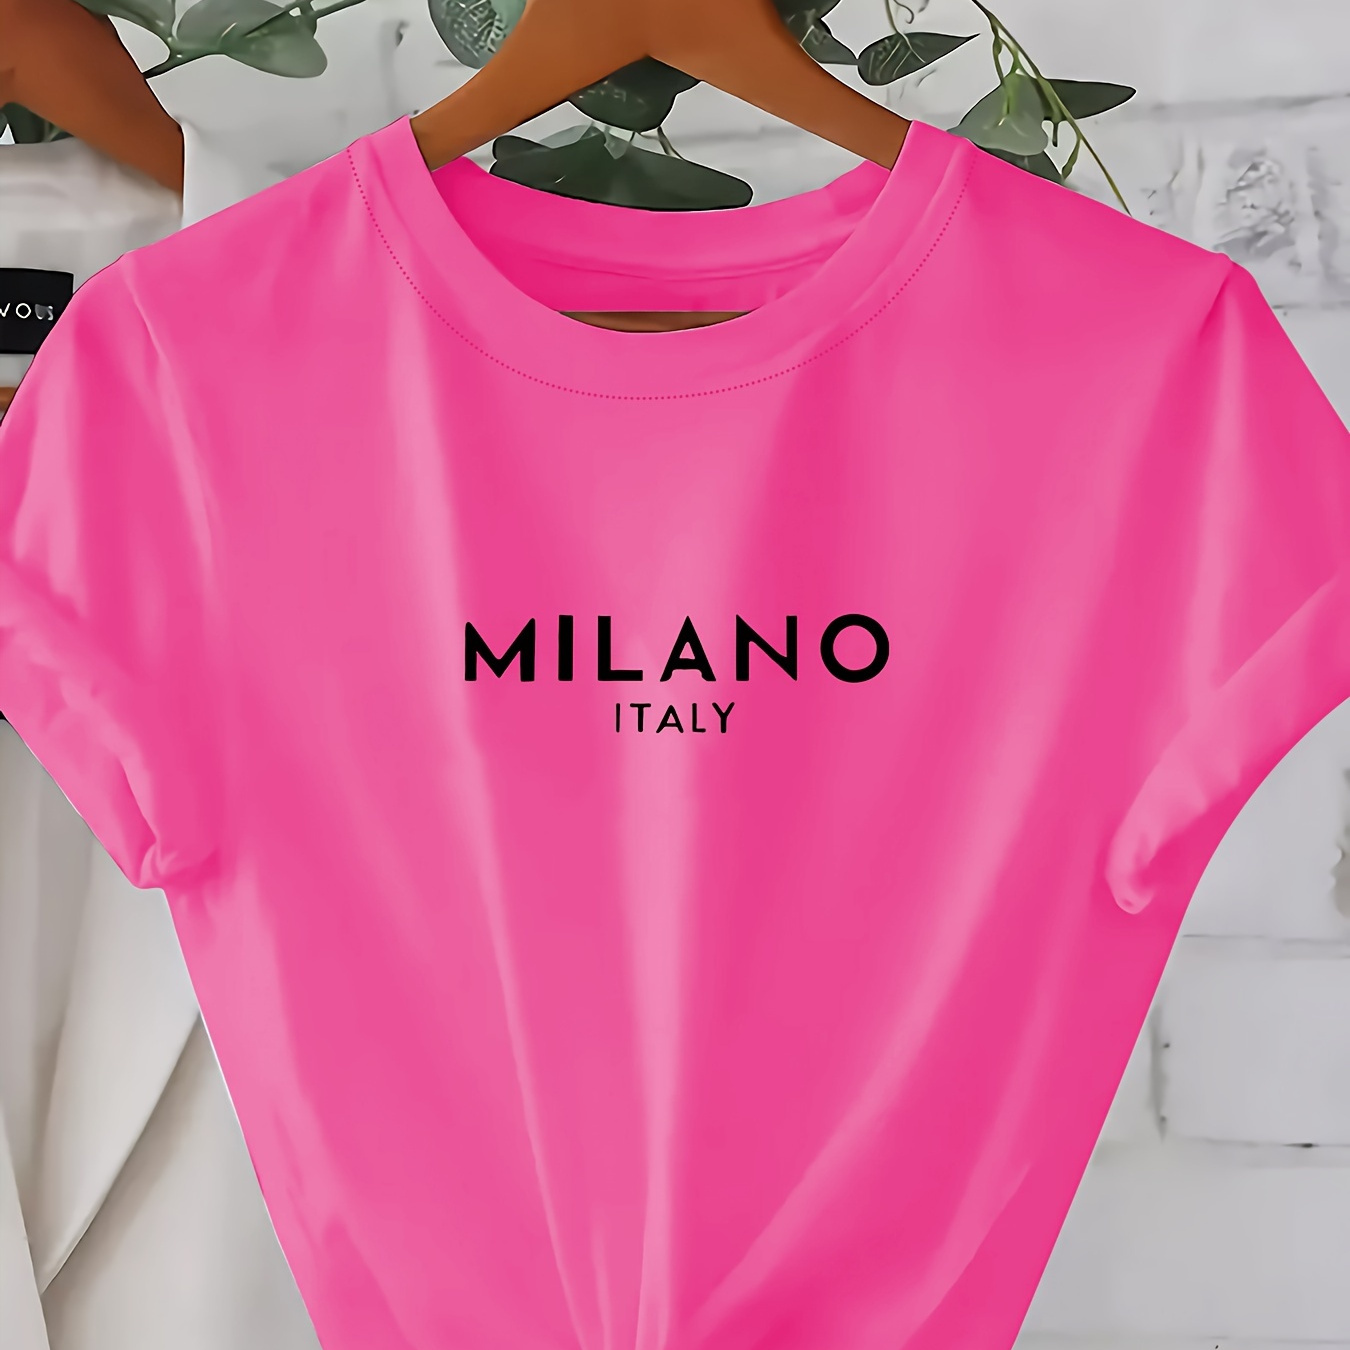 

Plus Size Milano Print T-shirt, Casual Short Sleeve Crew Neck Top For Spring & Summer, Women's Plus Size Clothing